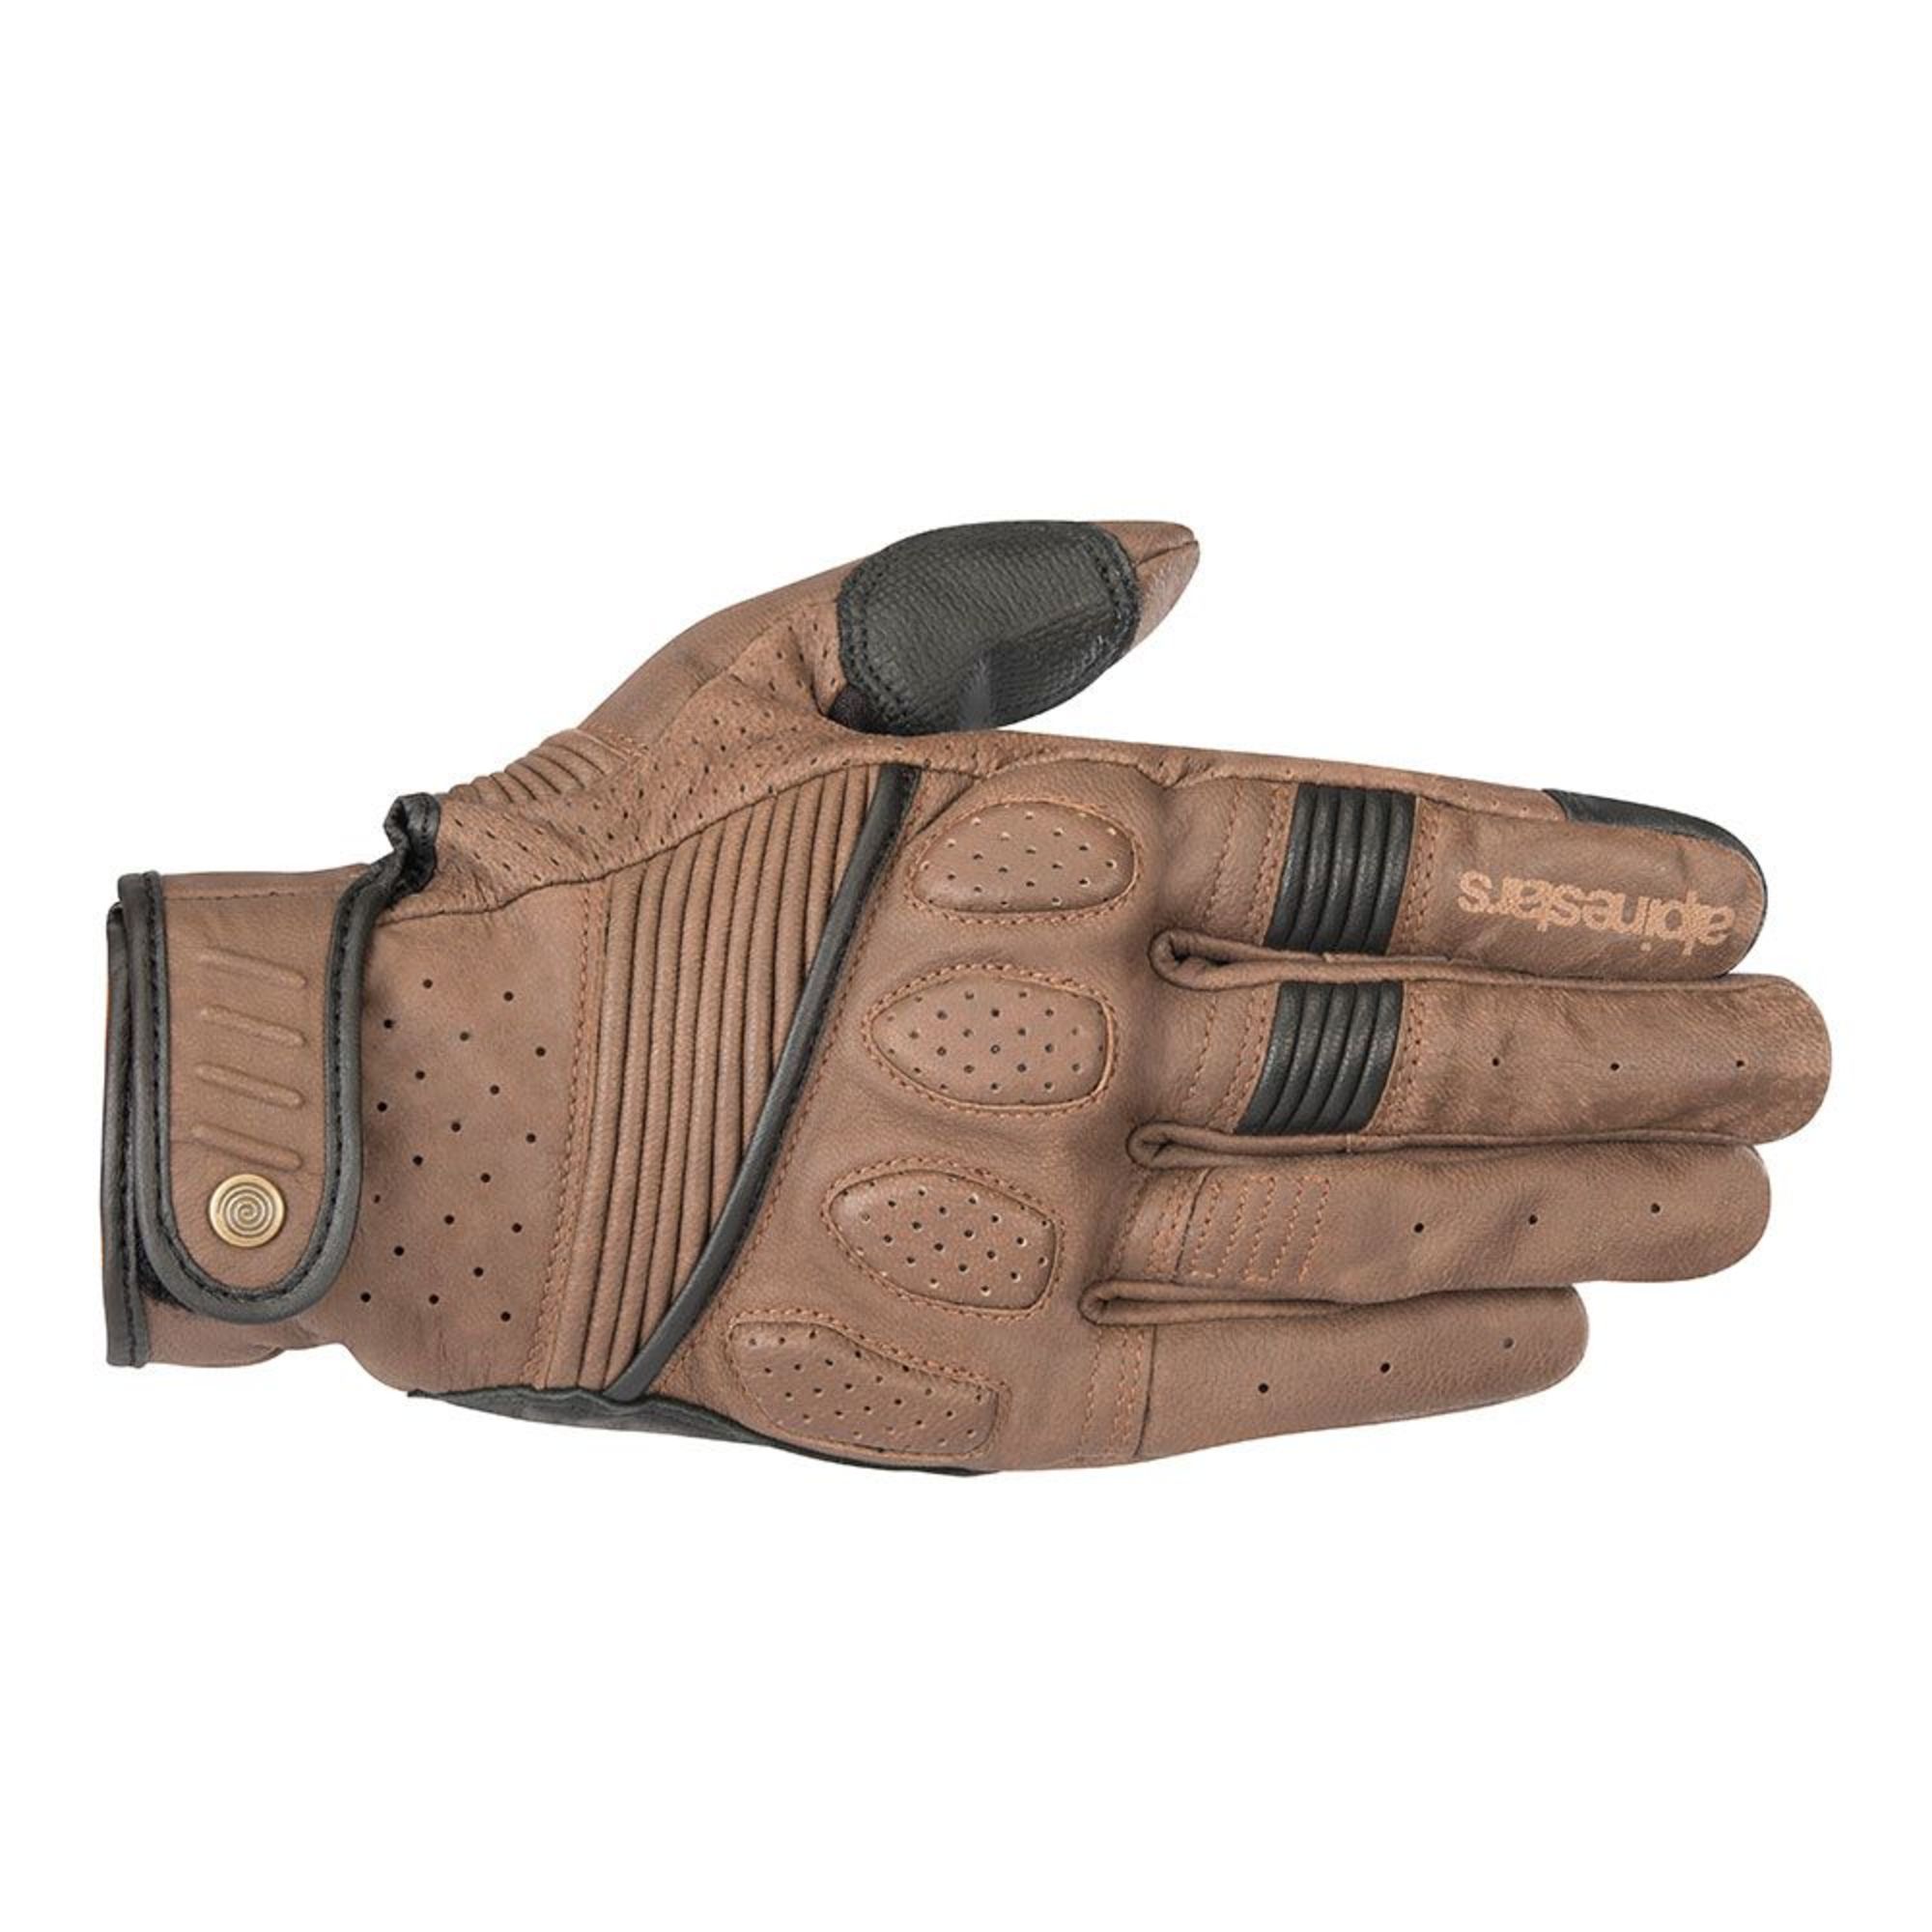 alpinestars leather gloves for men crazy eight perforated